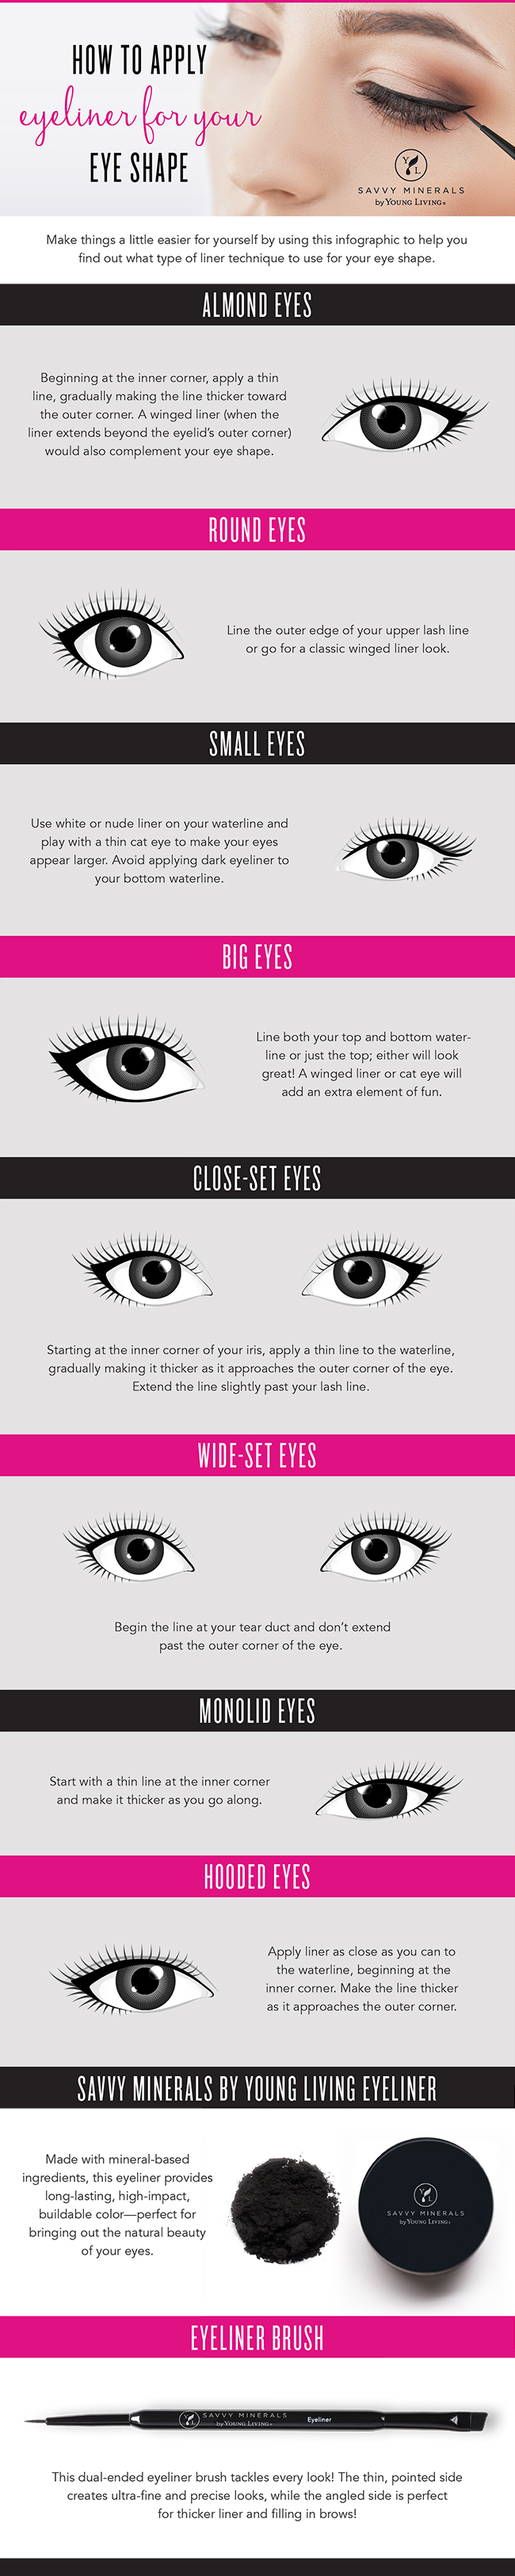 How To Apply Eyeliner For Your Eye Shape | atelier-yuwa.ciao.jp